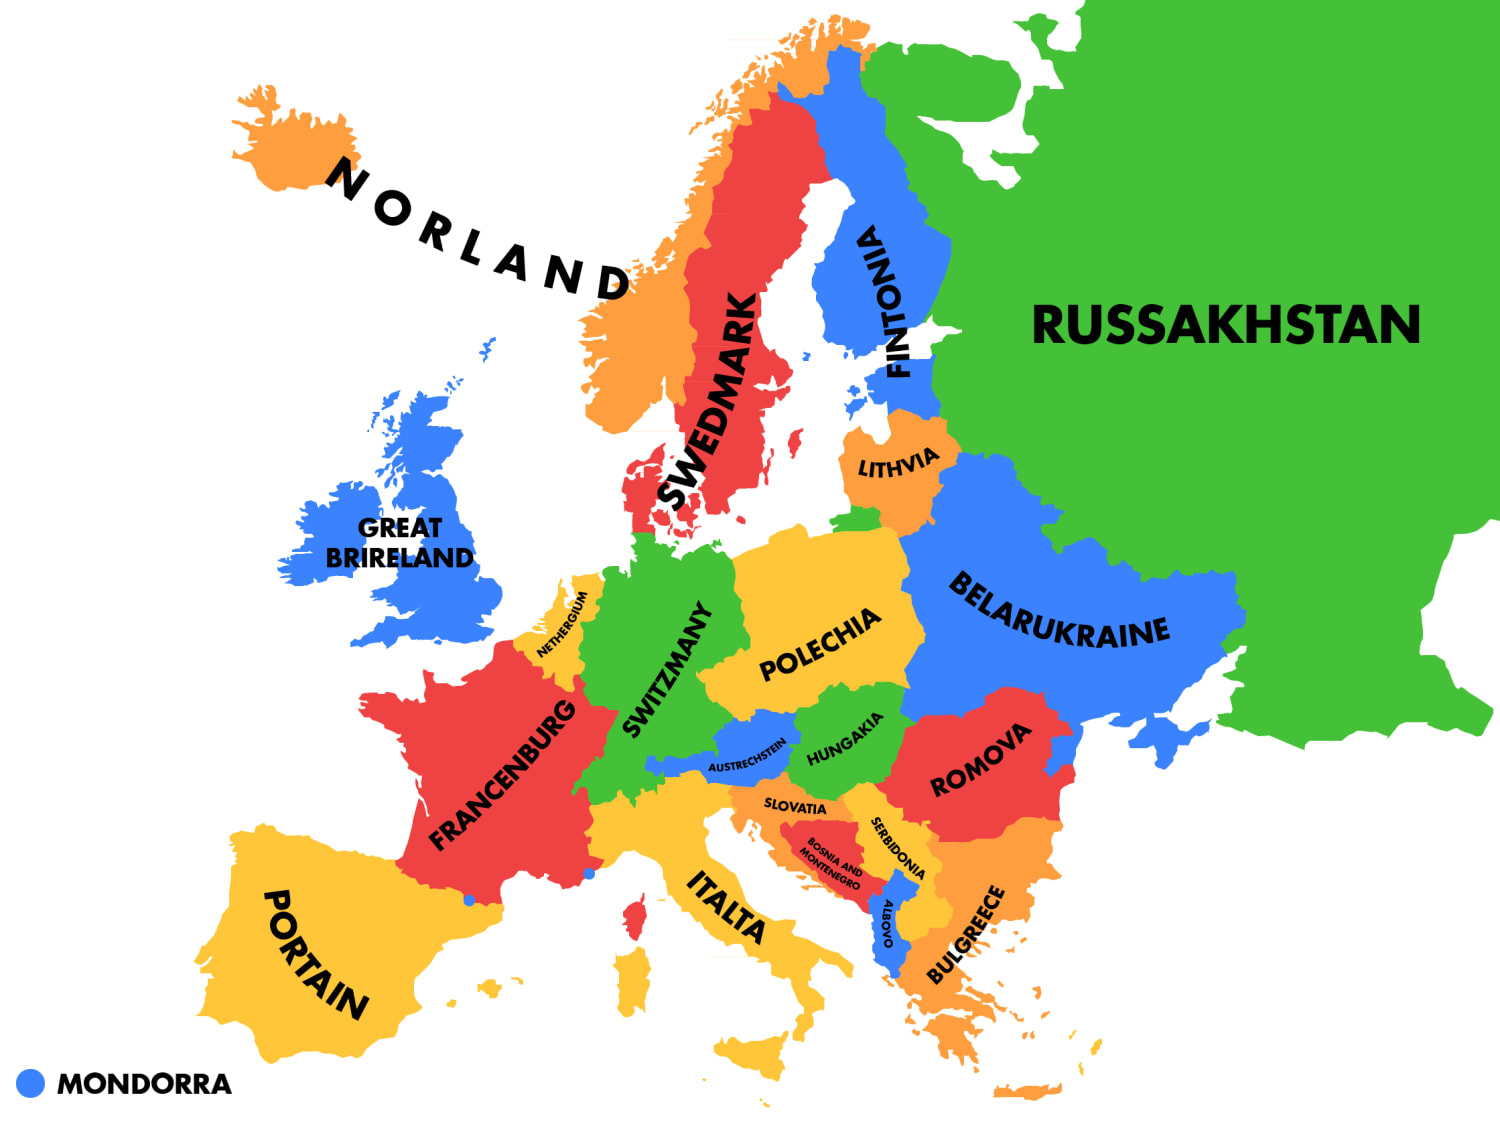 All countries in Europe merged with a neighboring one (even their names)